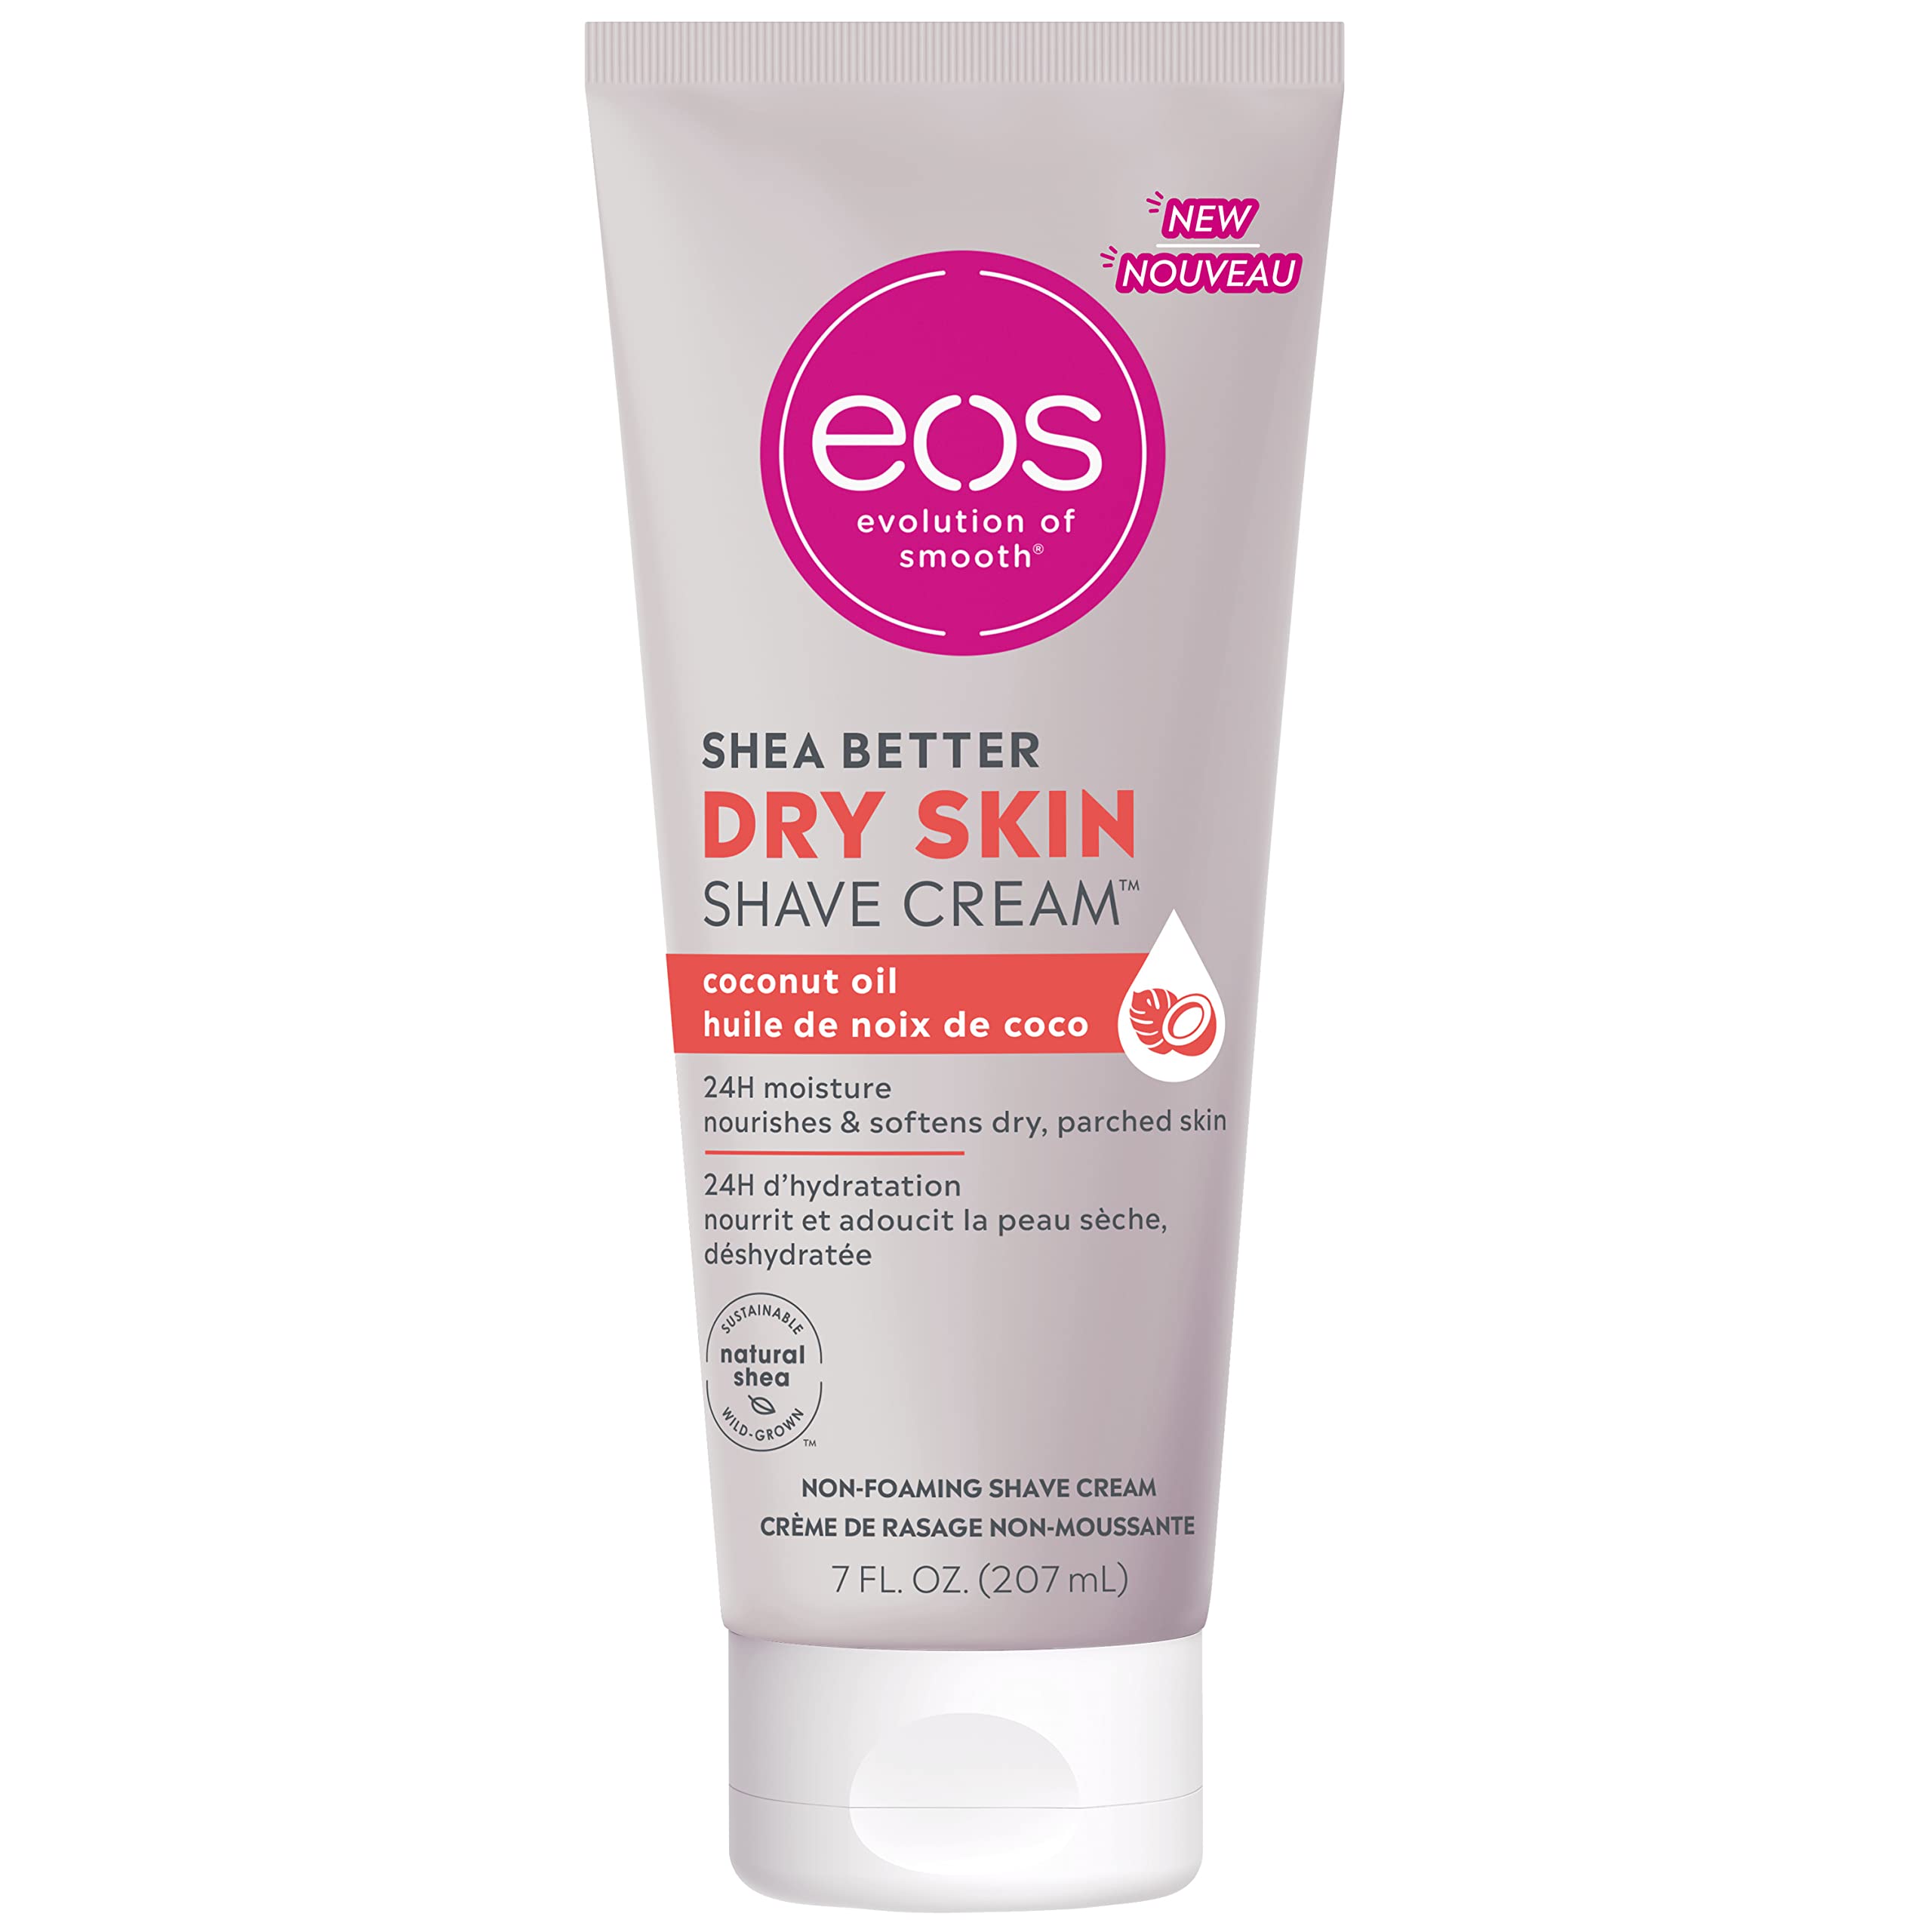 eos Shea Better Dry Skin Shaving Cream, Shave Cream for Women, Skin Care and Lotion with Coconut Oil, 24-Hour Hydration, 7 fl oz, Packaging May Vary